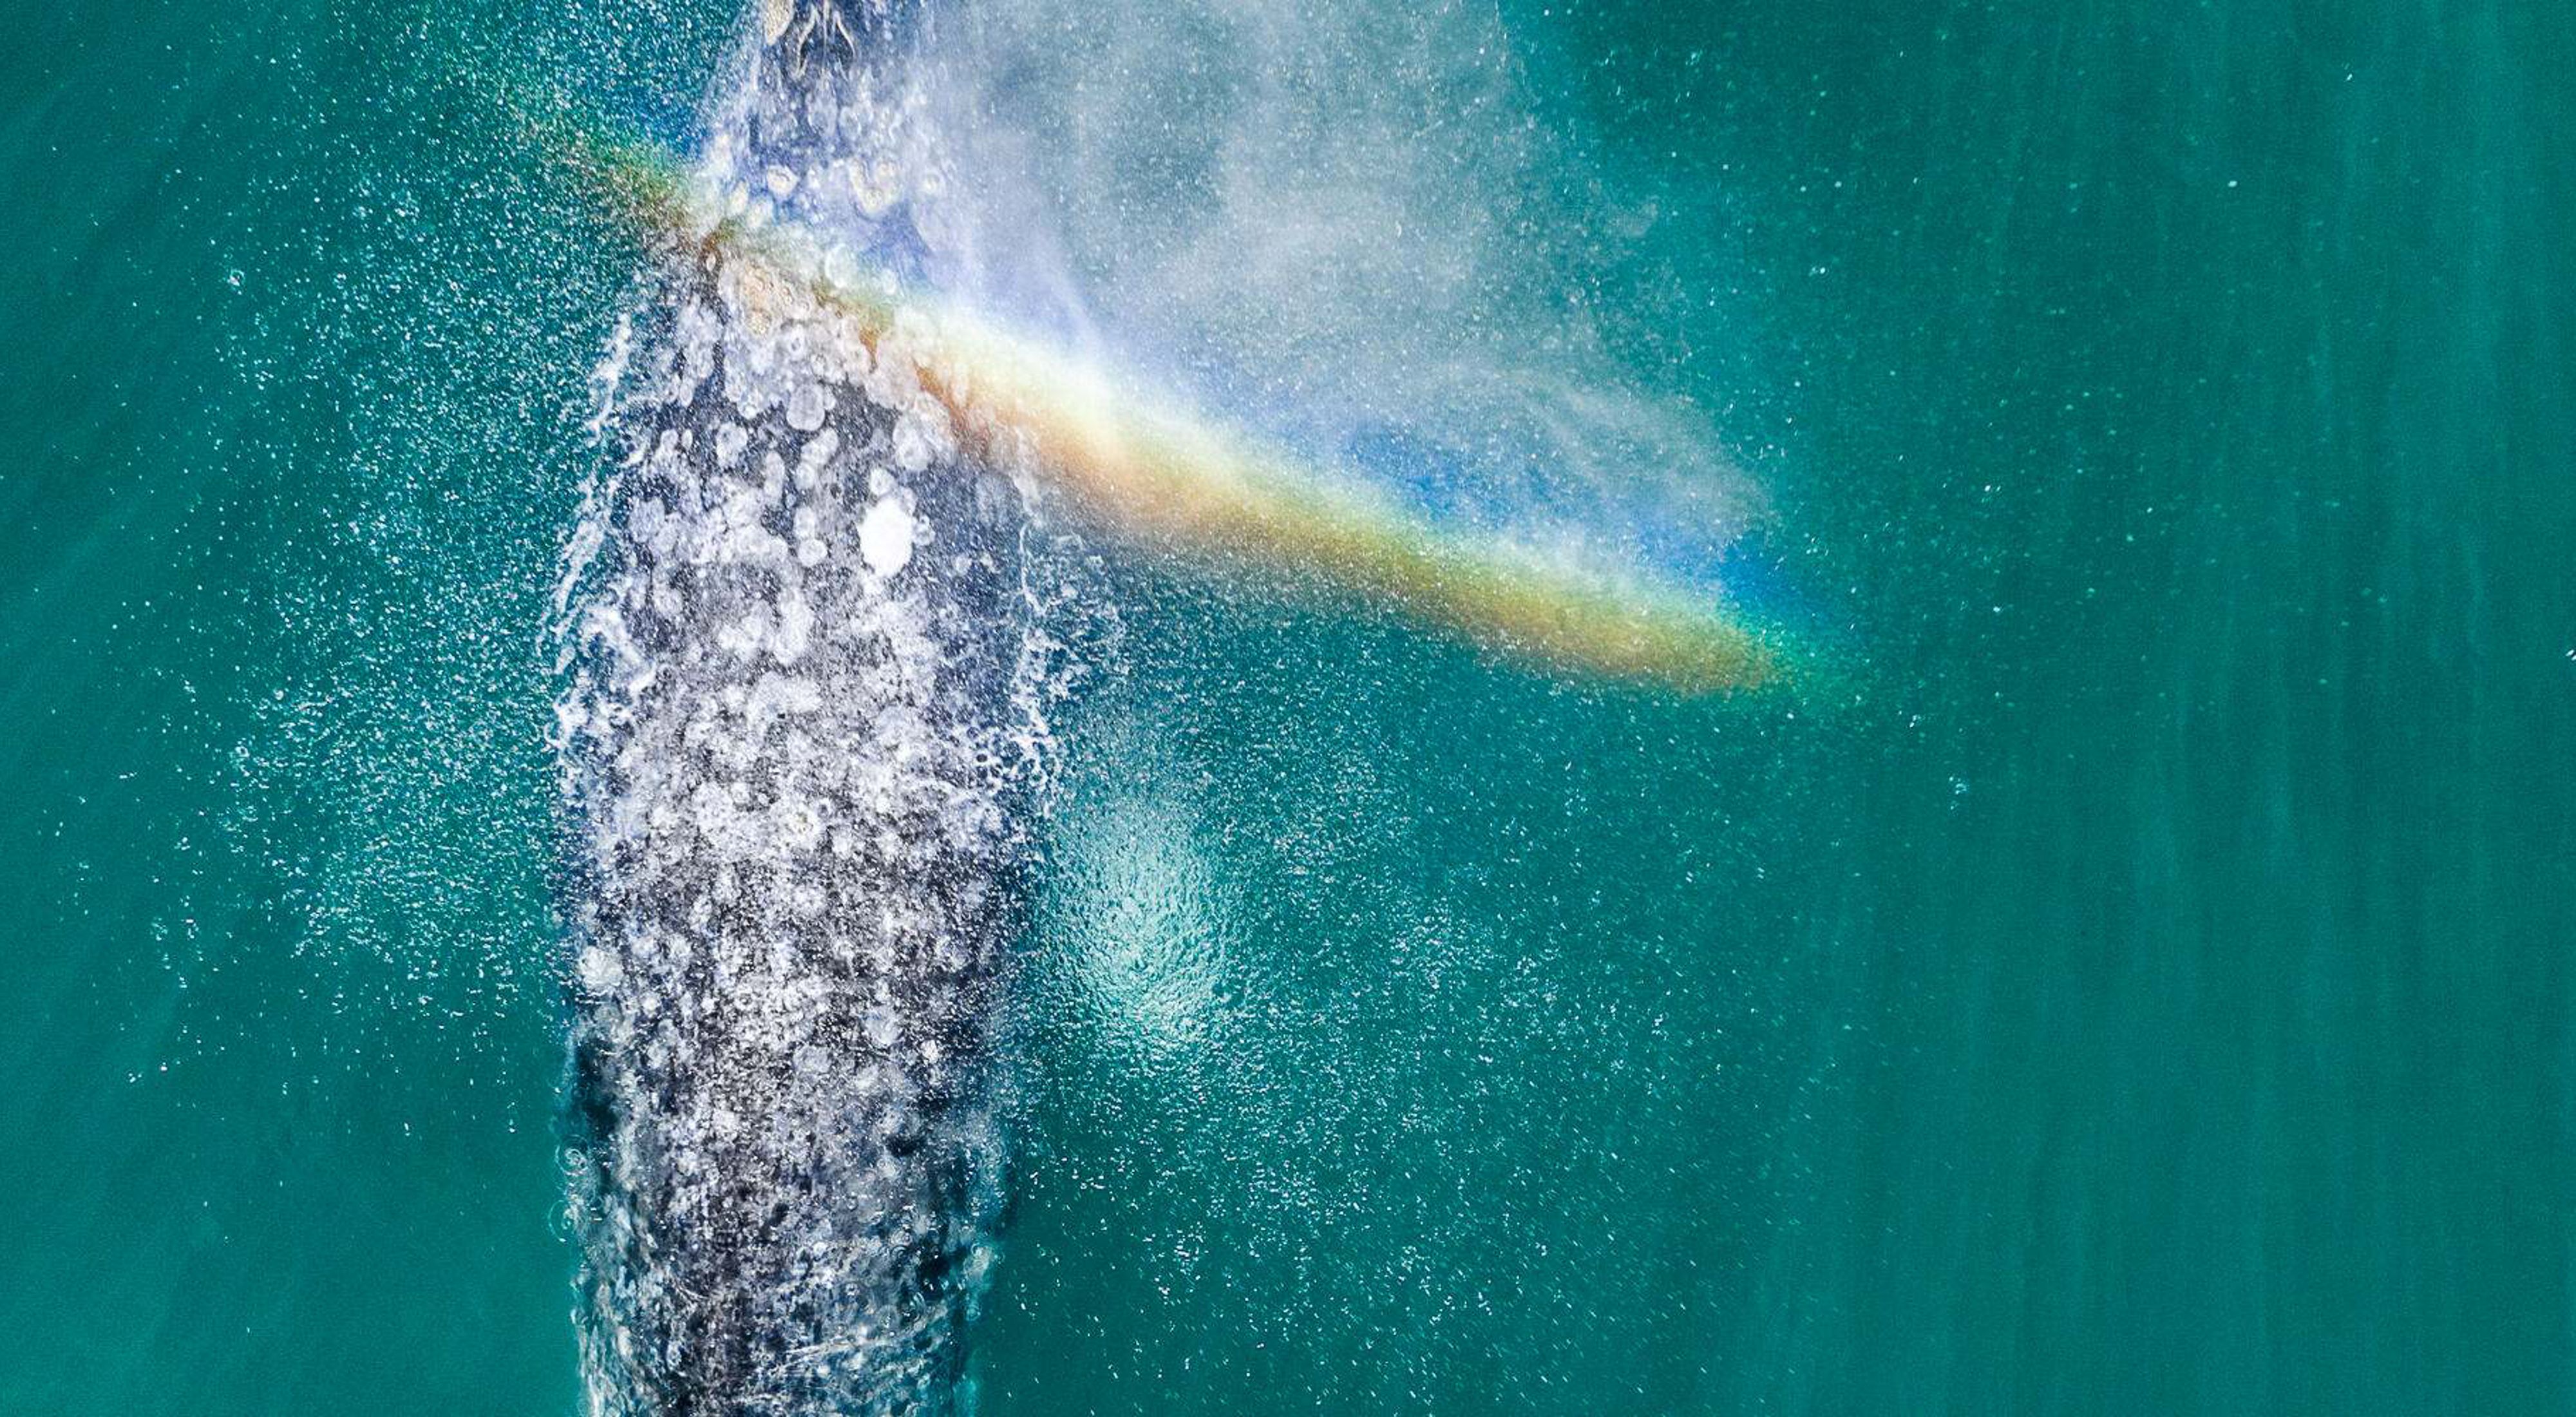 a gray whale blowing mist that has created a rainbow.